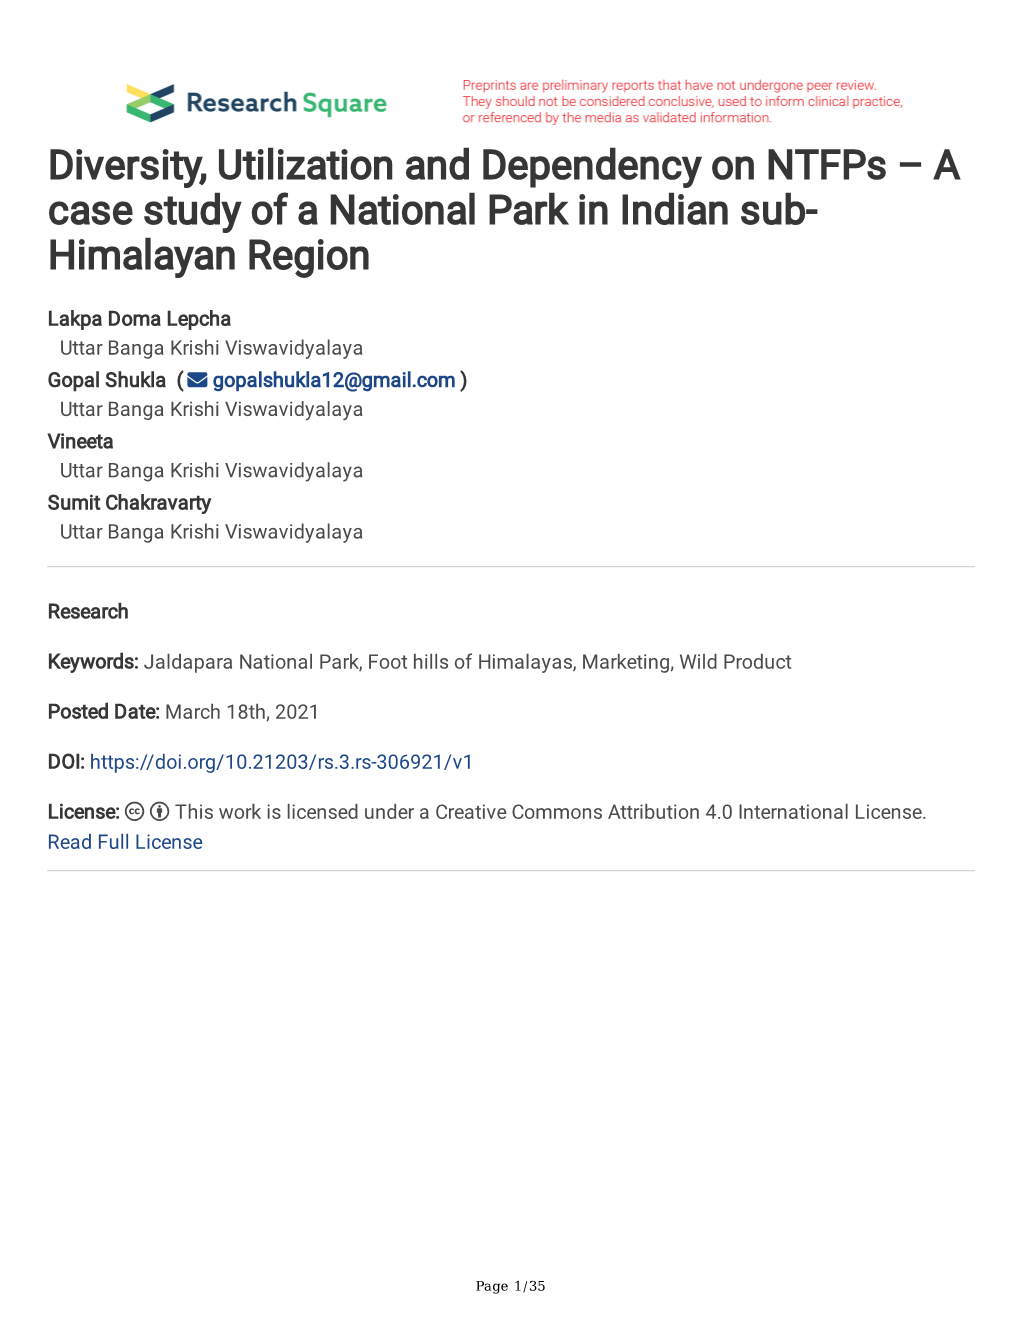 Diversity, Utilization and Dependency on Ntfps – a Case Study of a National Park in Indian Sub- Himalayan Region